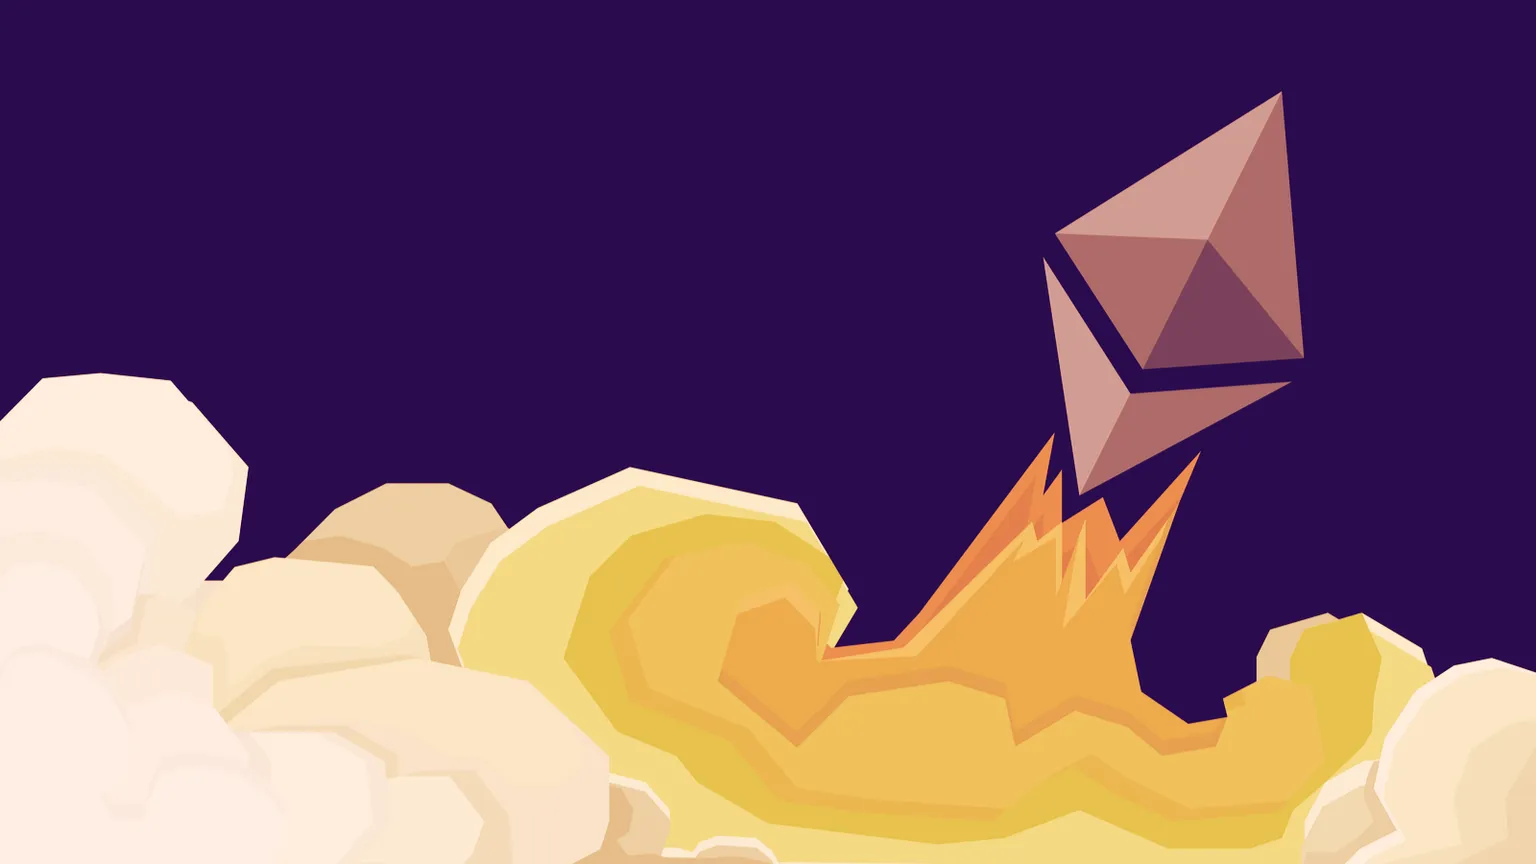 Ethereum 2.0 inches ever closer to launch with release of desposit creation tool. Image: Shutterstock